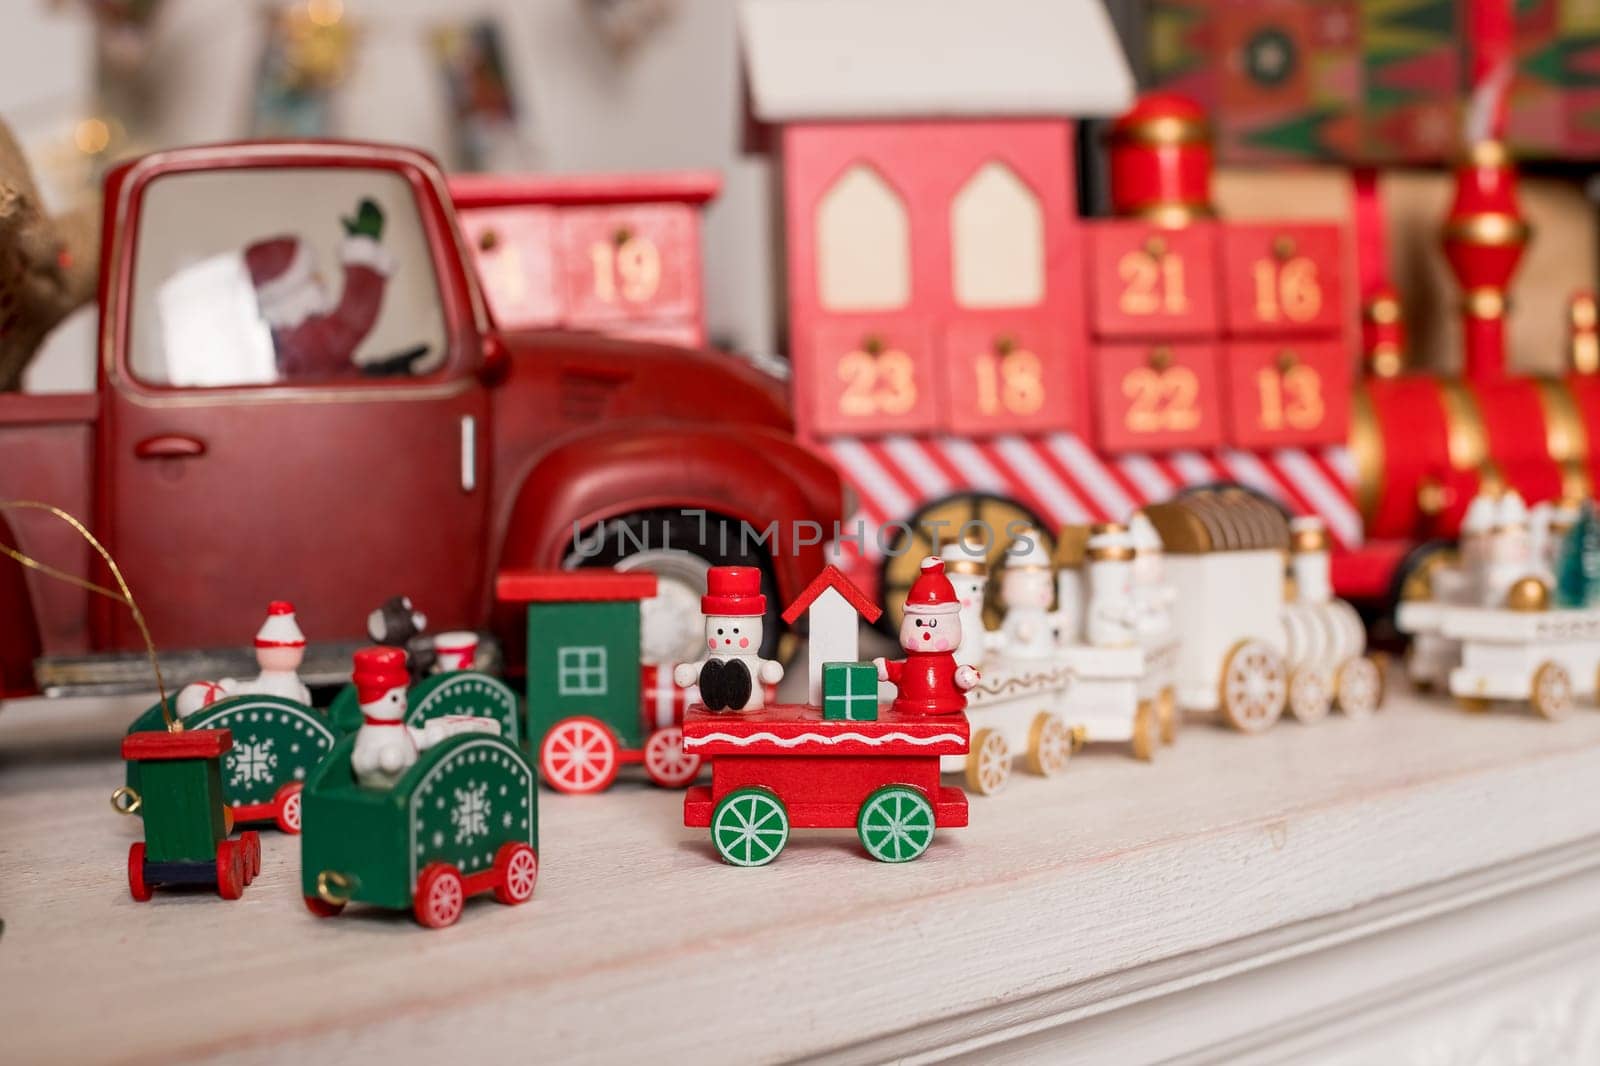 Wooden toy train. Christmas trip. Christmas card. toy vintage steam locomotive.New year celebration concept.toy store by YuliaYaspe1979